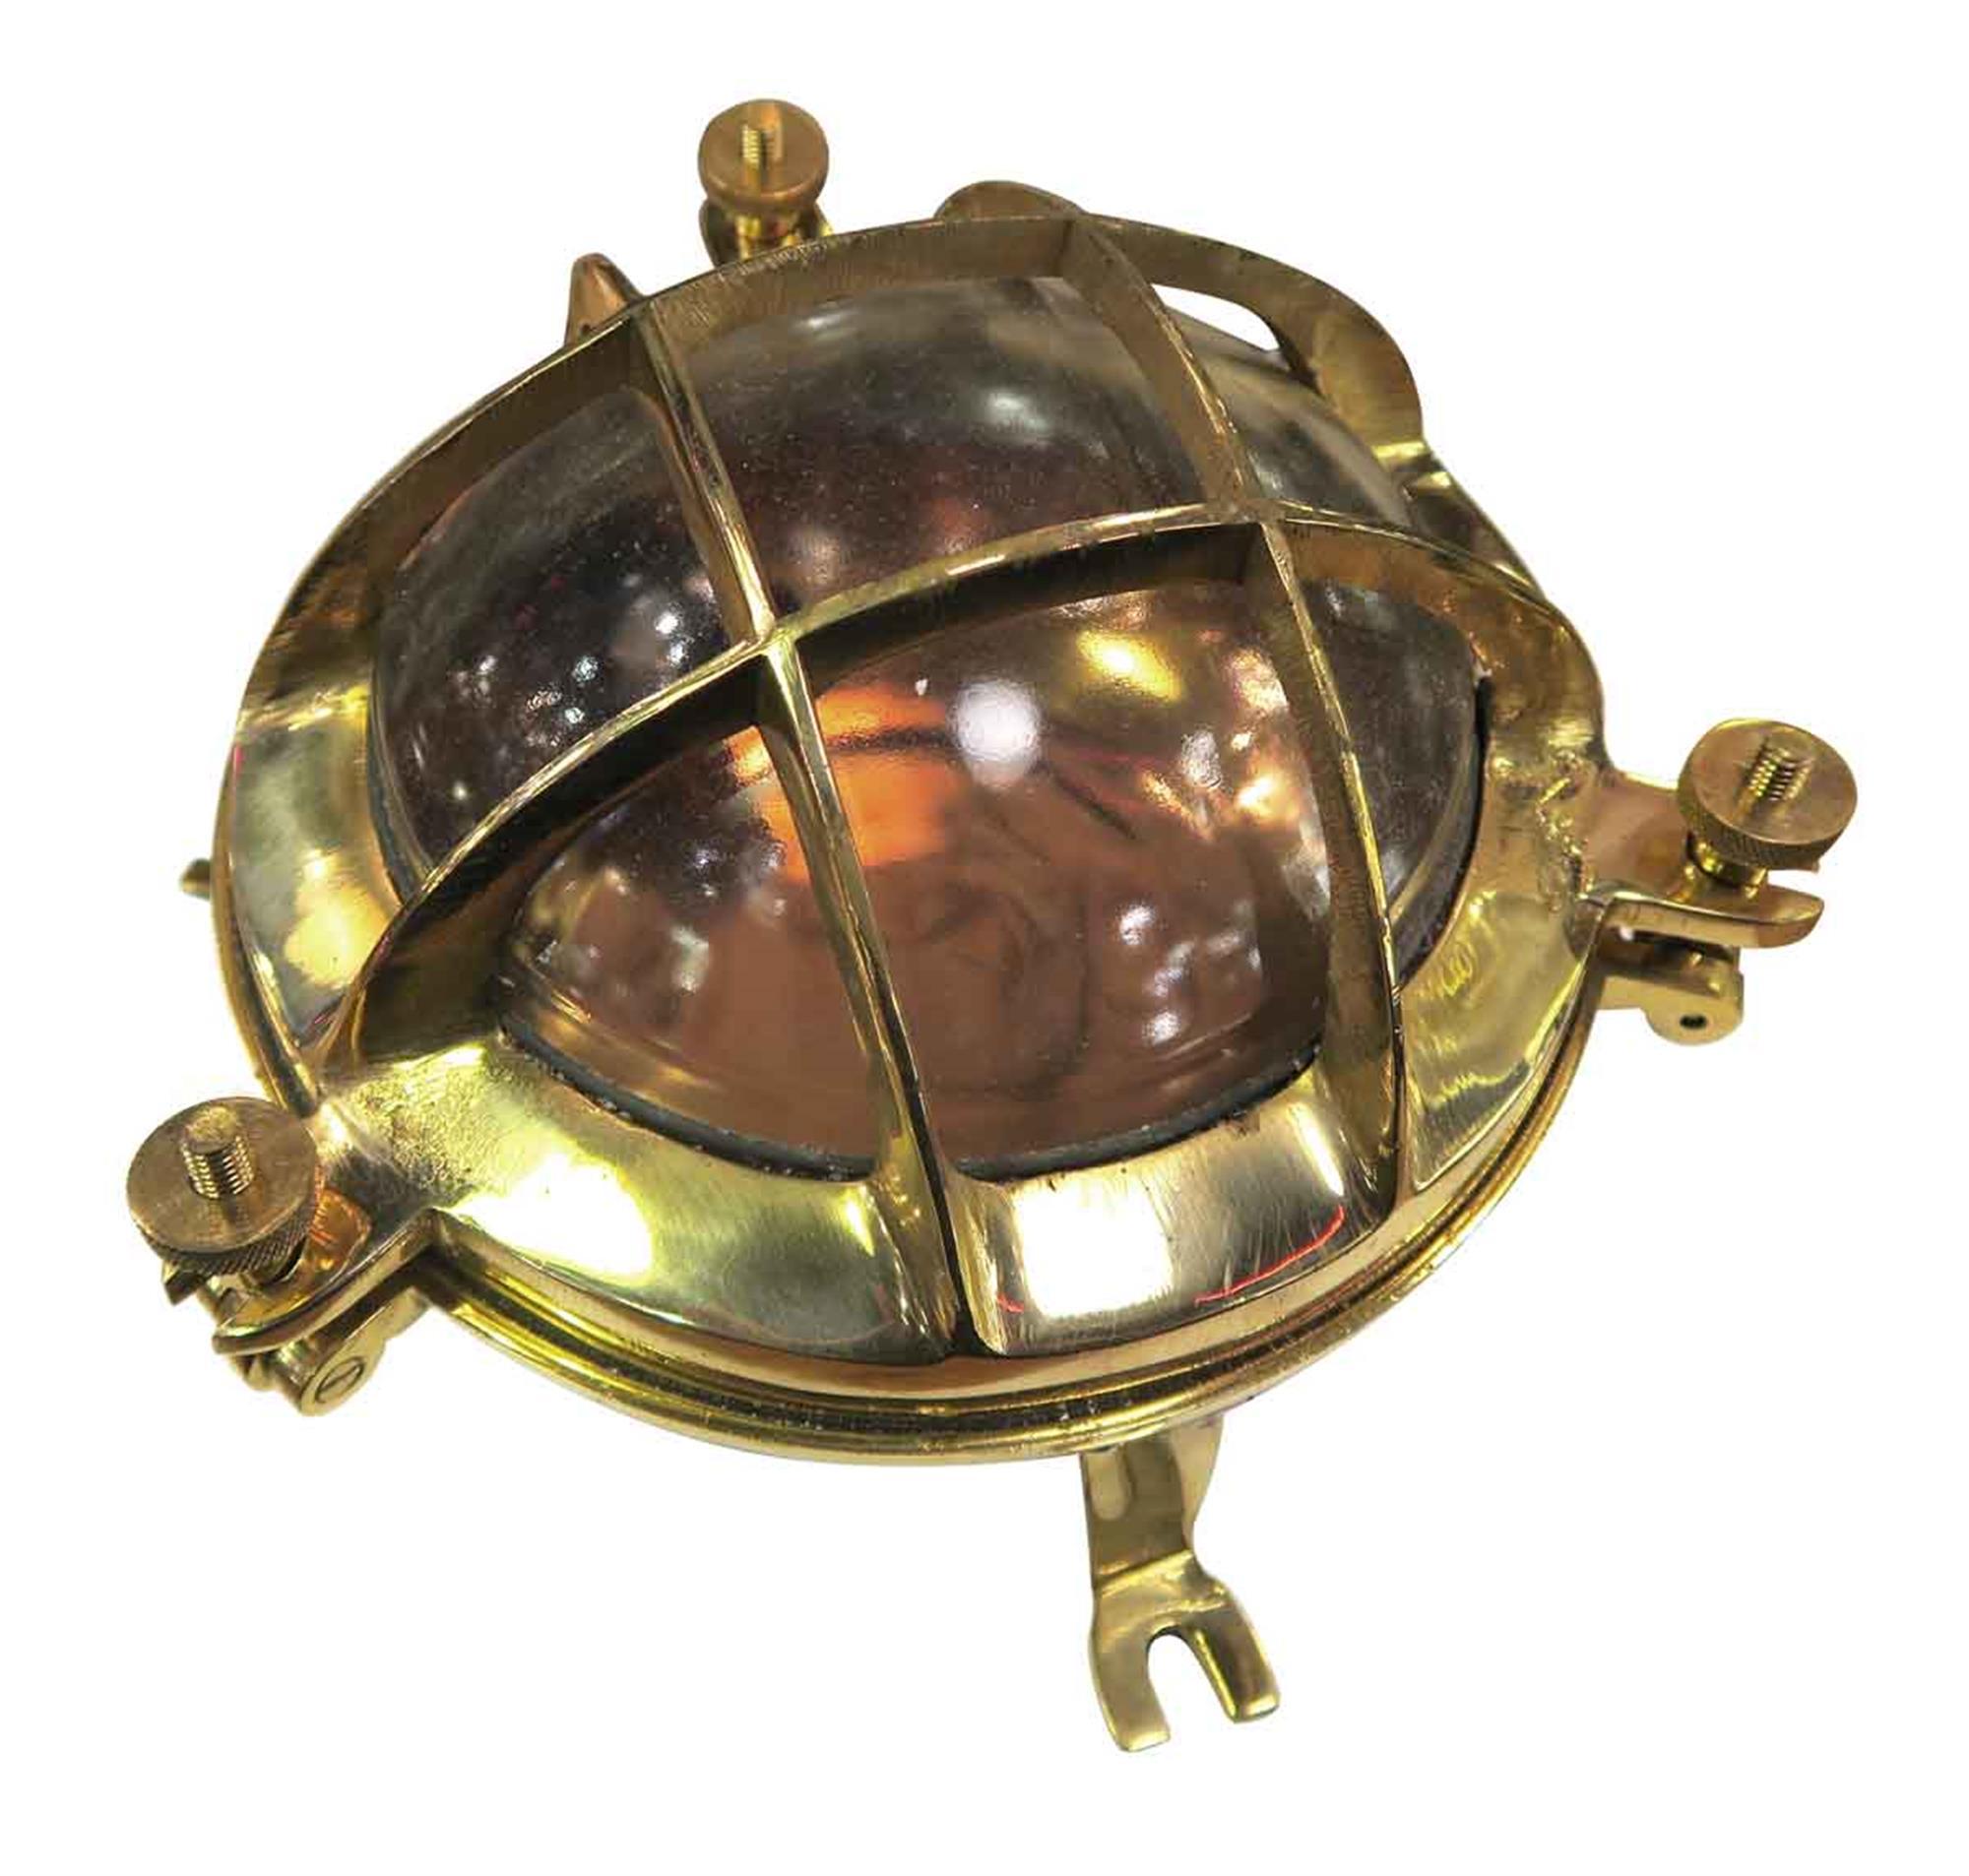 Very good quality sconce light, made of heavy brass and copper round ship porthole suitable for indoor or outdoor use. Takes one E26 household light bulb. Cleaned and rewired. Small quantity available at time of posting. Please inquire. Priced each.